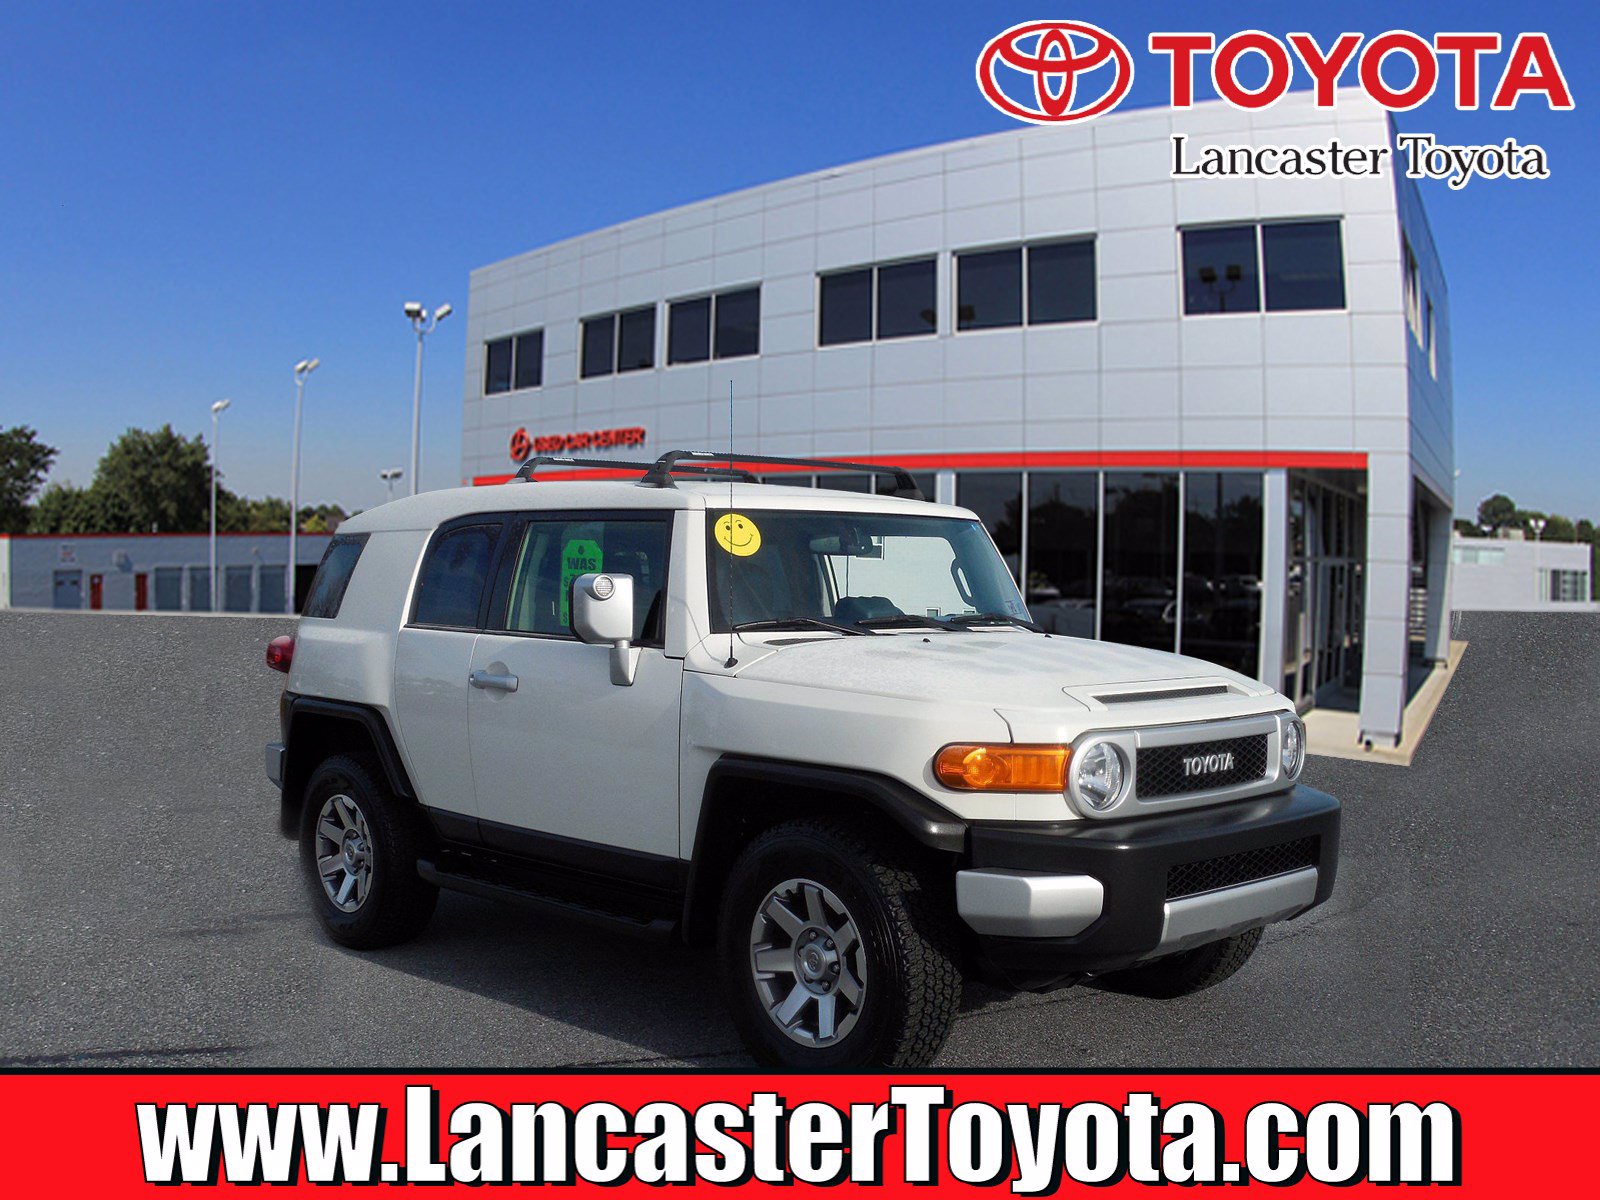 Used Toyota Fj Cruiser Vehicles For Sale In East Petersburg Pa